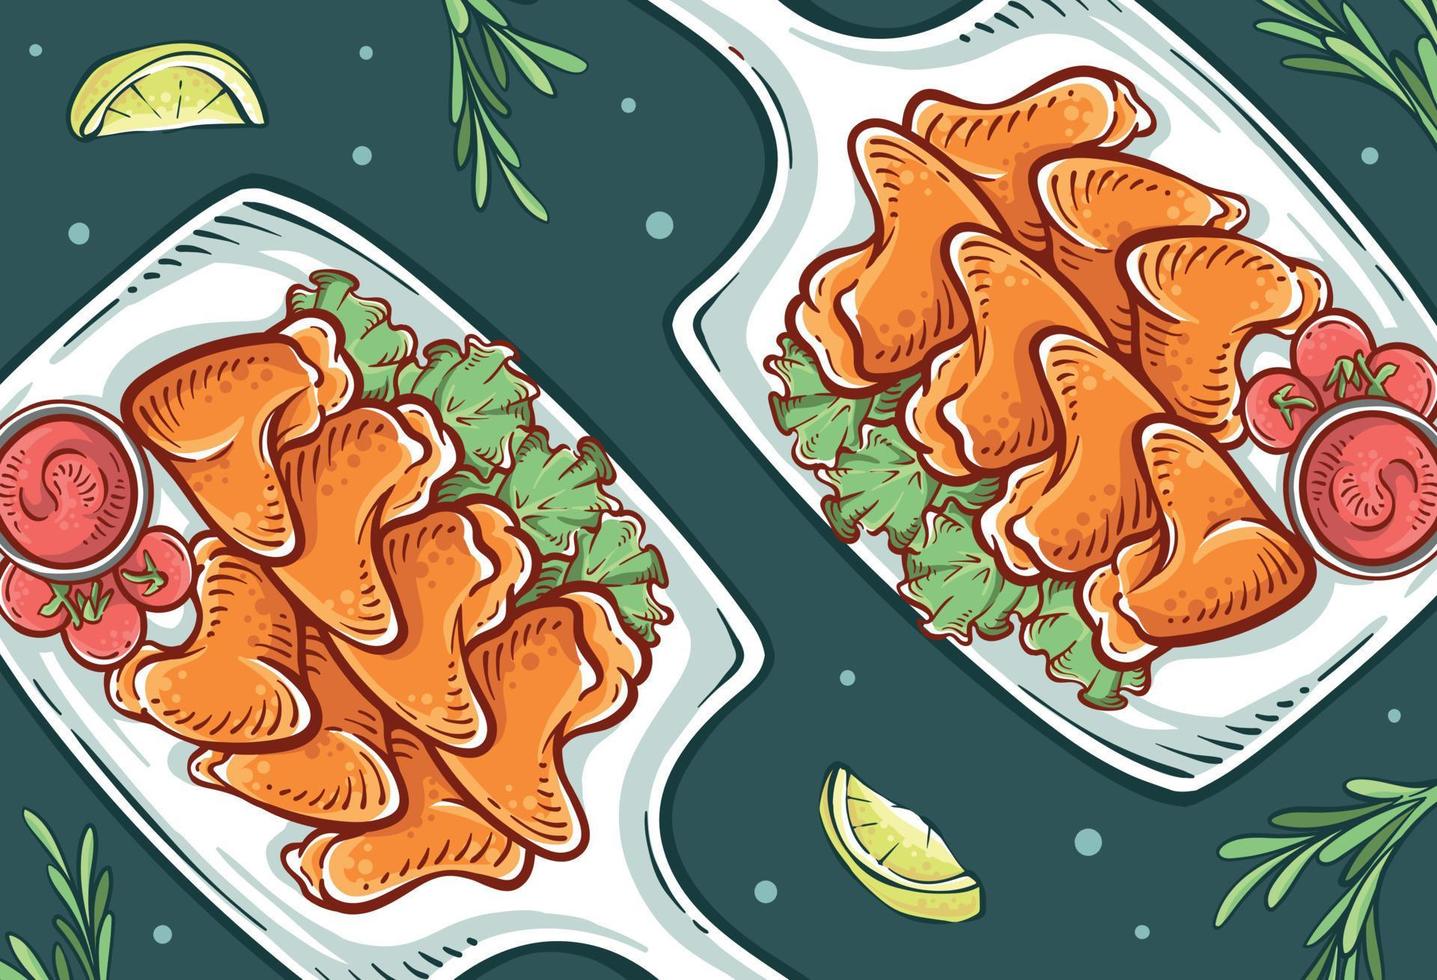 Chicken wing dish illustration top view. Chicken Hand-drawn food with lemon slices and herbs in full color. Colorful chicken drawing vector design background